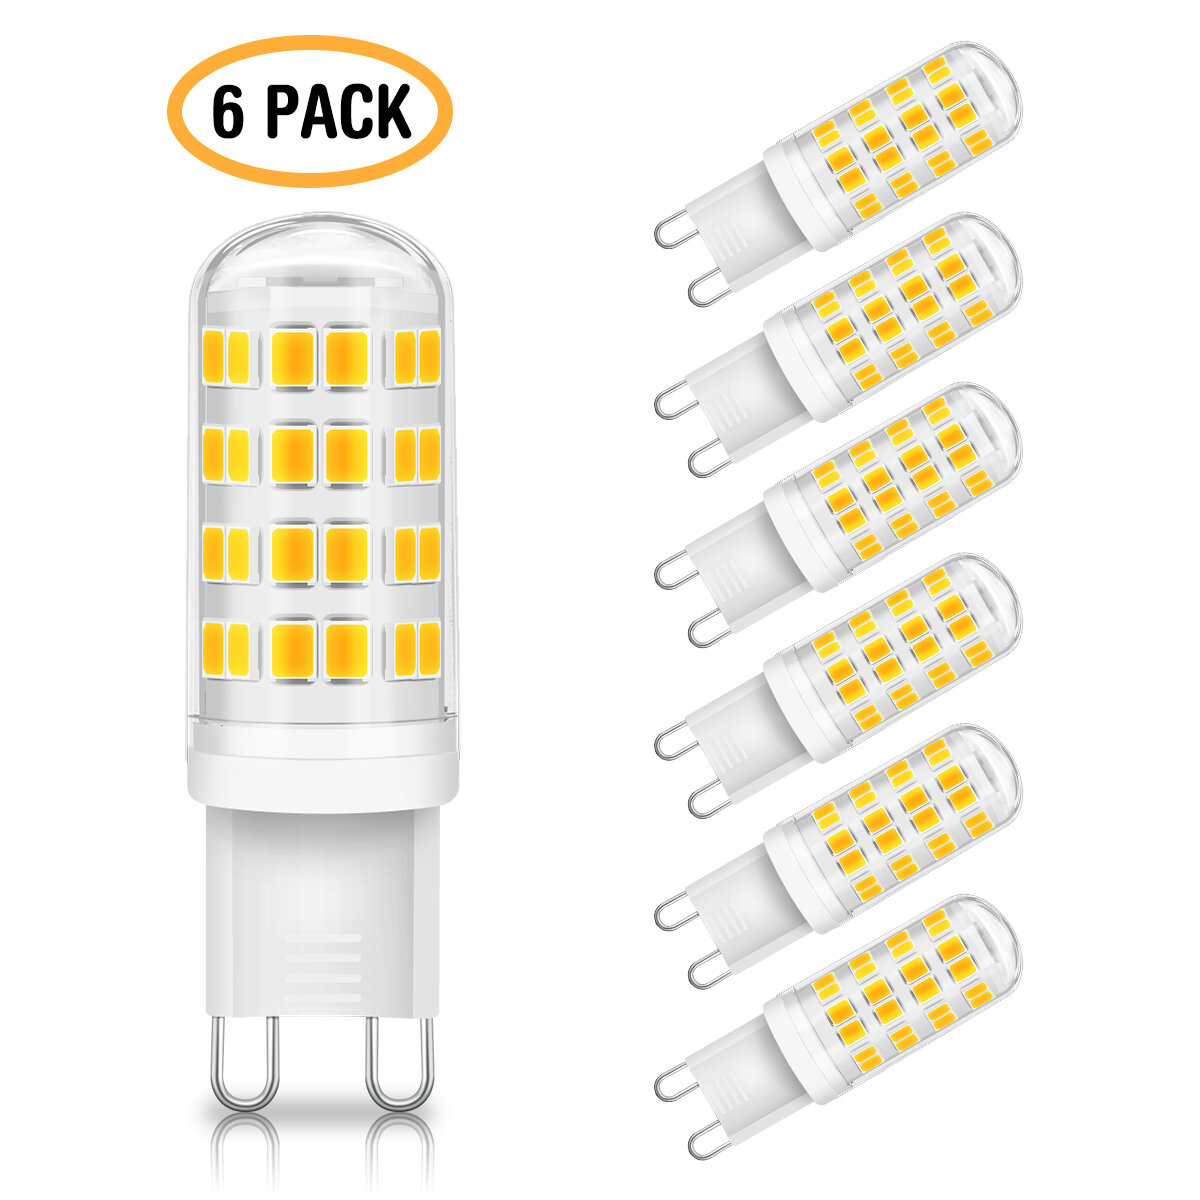 Kingso 6Pcs 6W 3000K 500lm G9 LED Bulb with 52pcs 2835 Lamp Beads for Living Room Bedroom Kitchen Dining Room